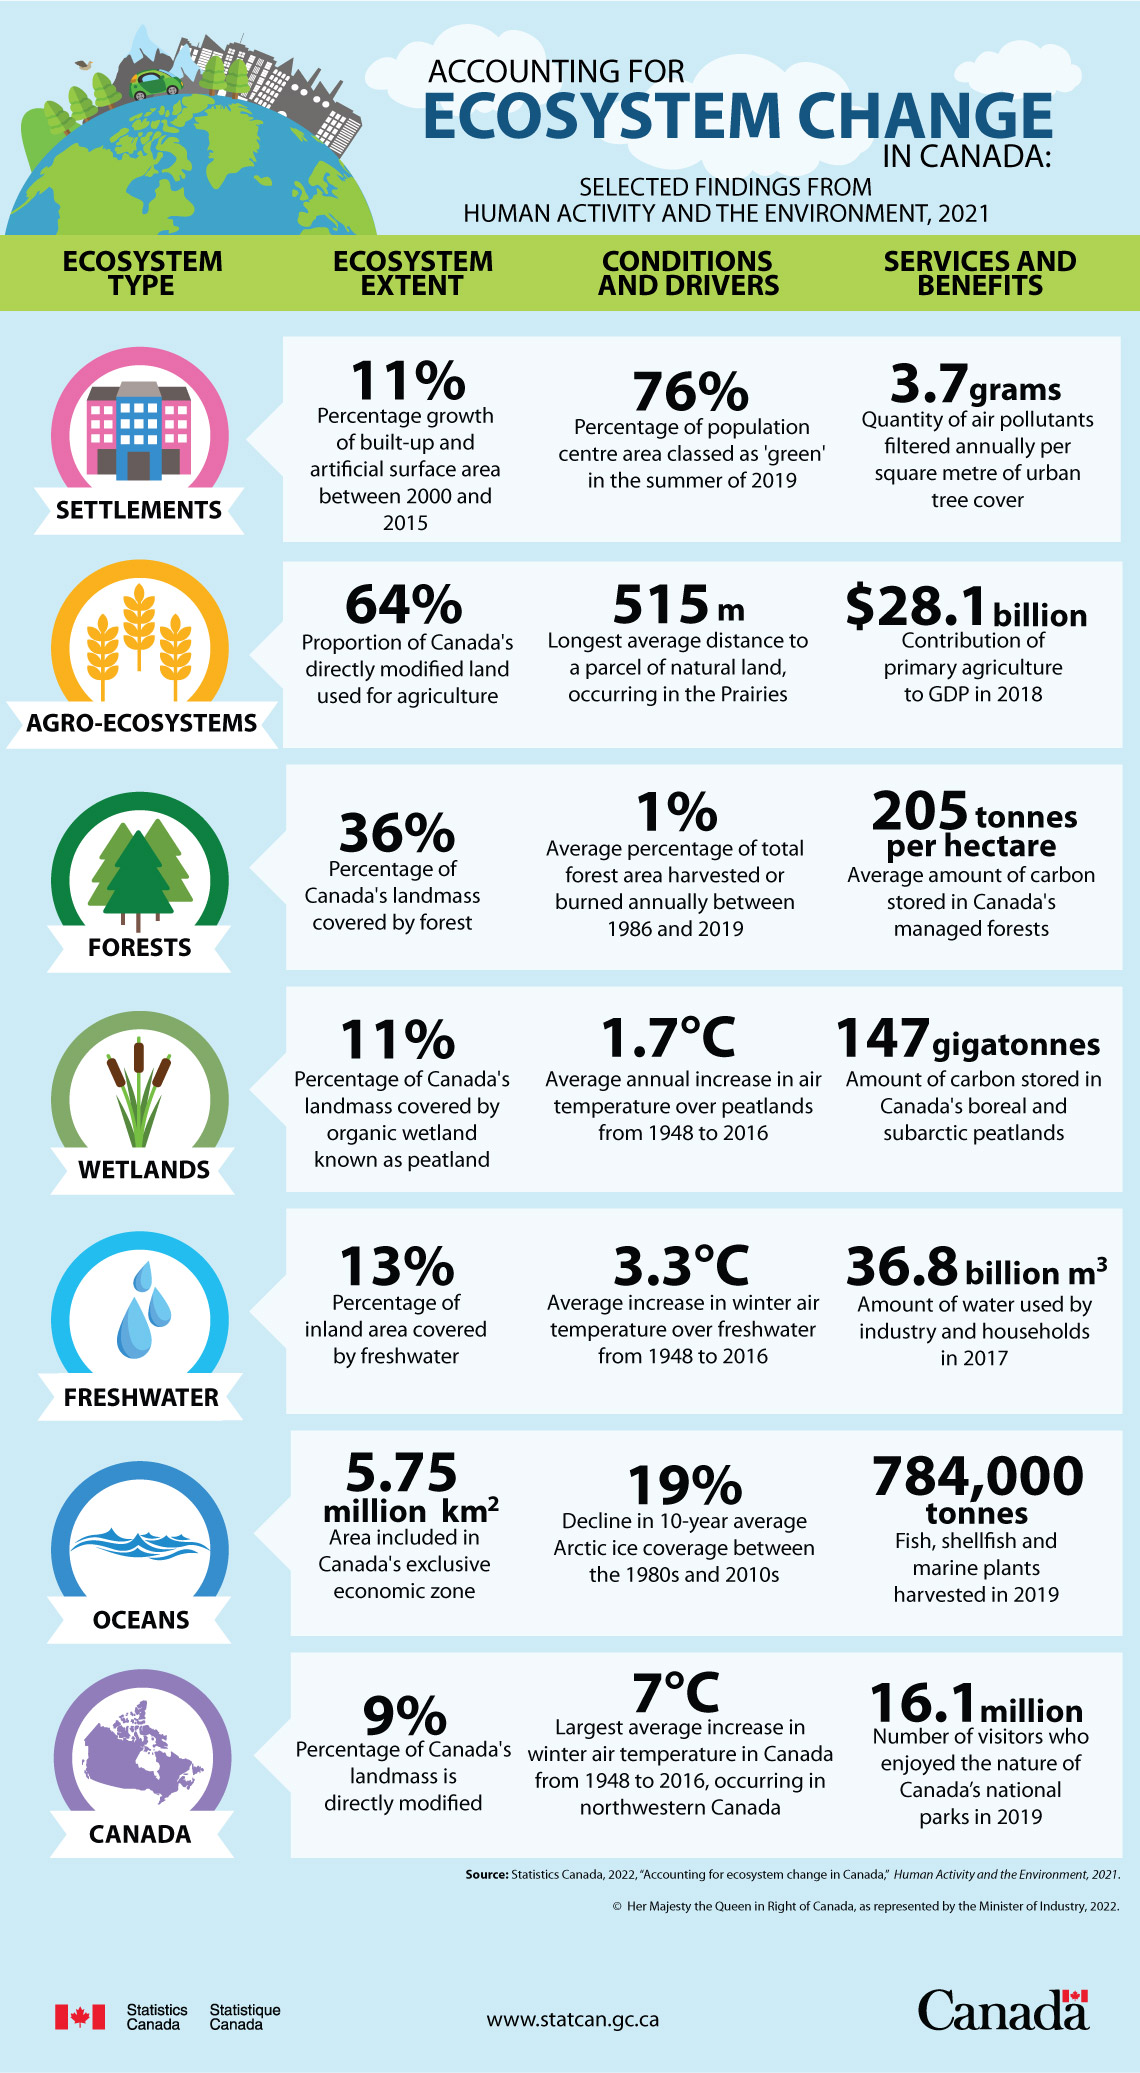 Infographic: Accounting for ecosystem change in Canada: selected findings from Human Activity and the Environment, 2021.